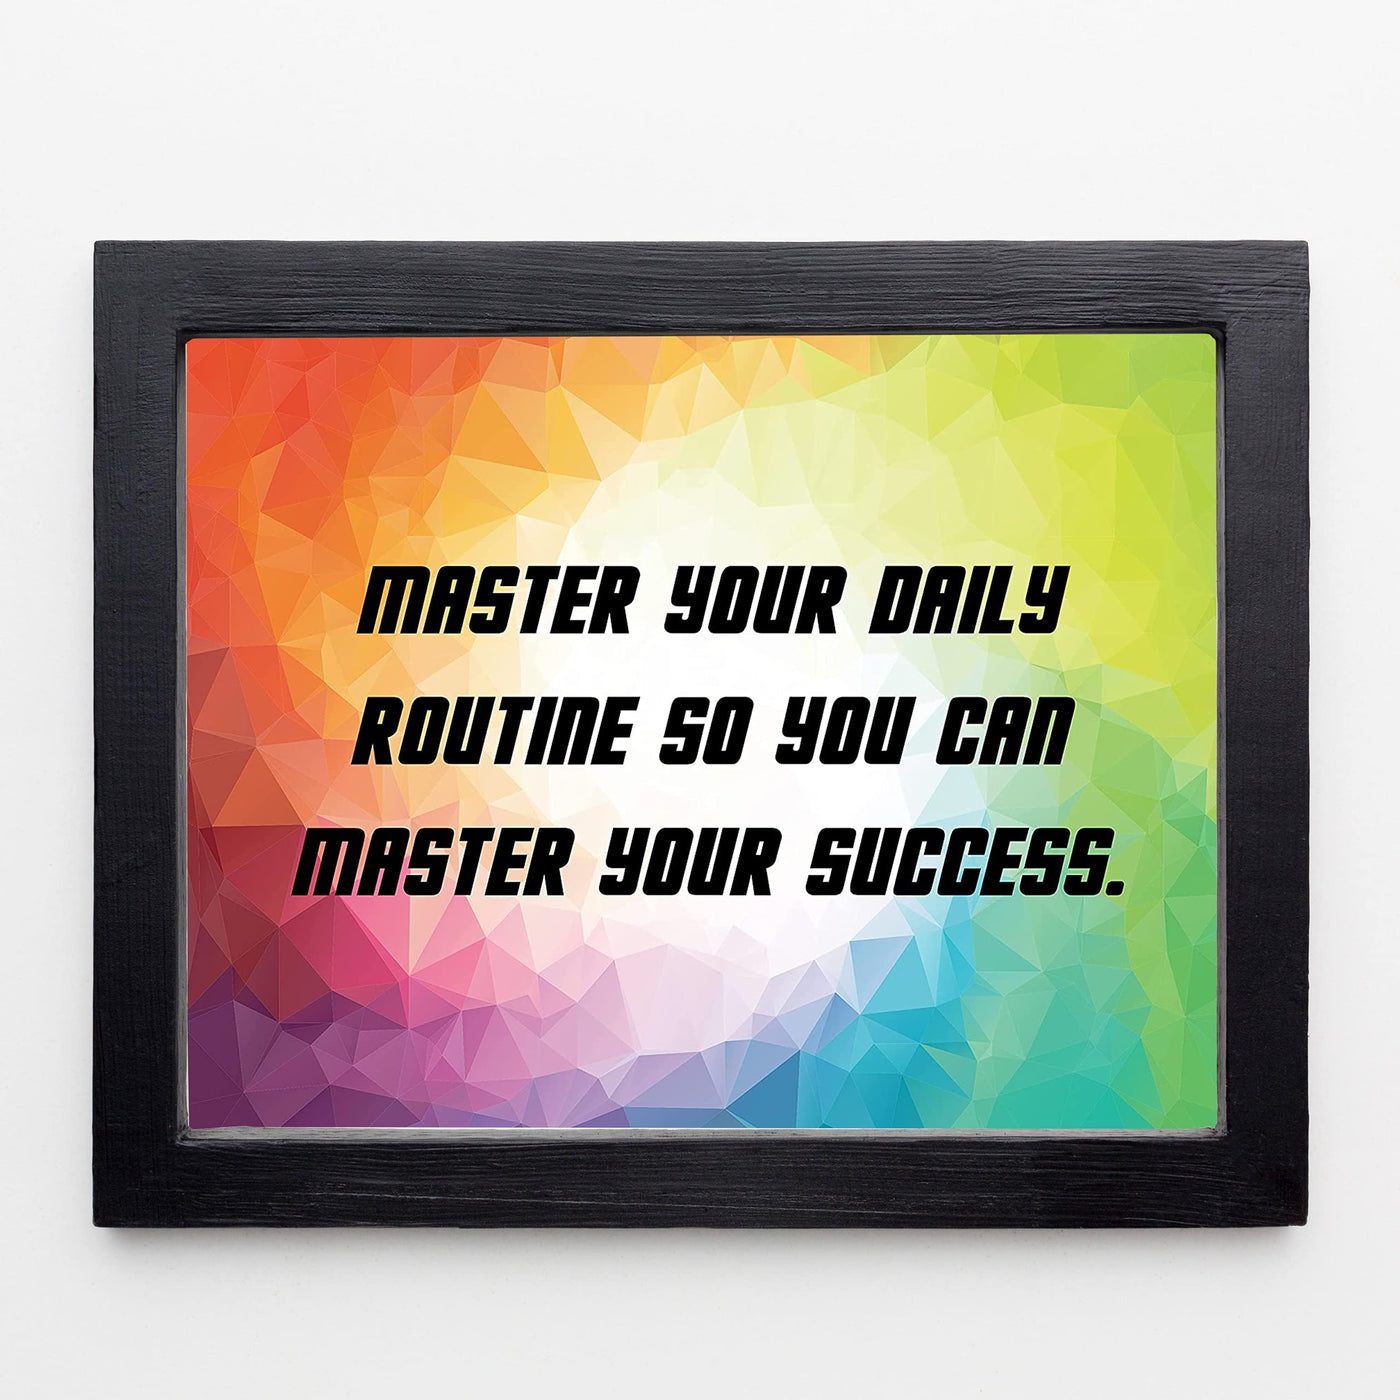 Master Your Daily Routine-Your Success Motivational Quotes Wall Sign -10 x 8" Abstract Typographic Art Print-Ready to Frame. Inspirational Home-Office-School-Dorm-Gym Decor. Great for Motivation!